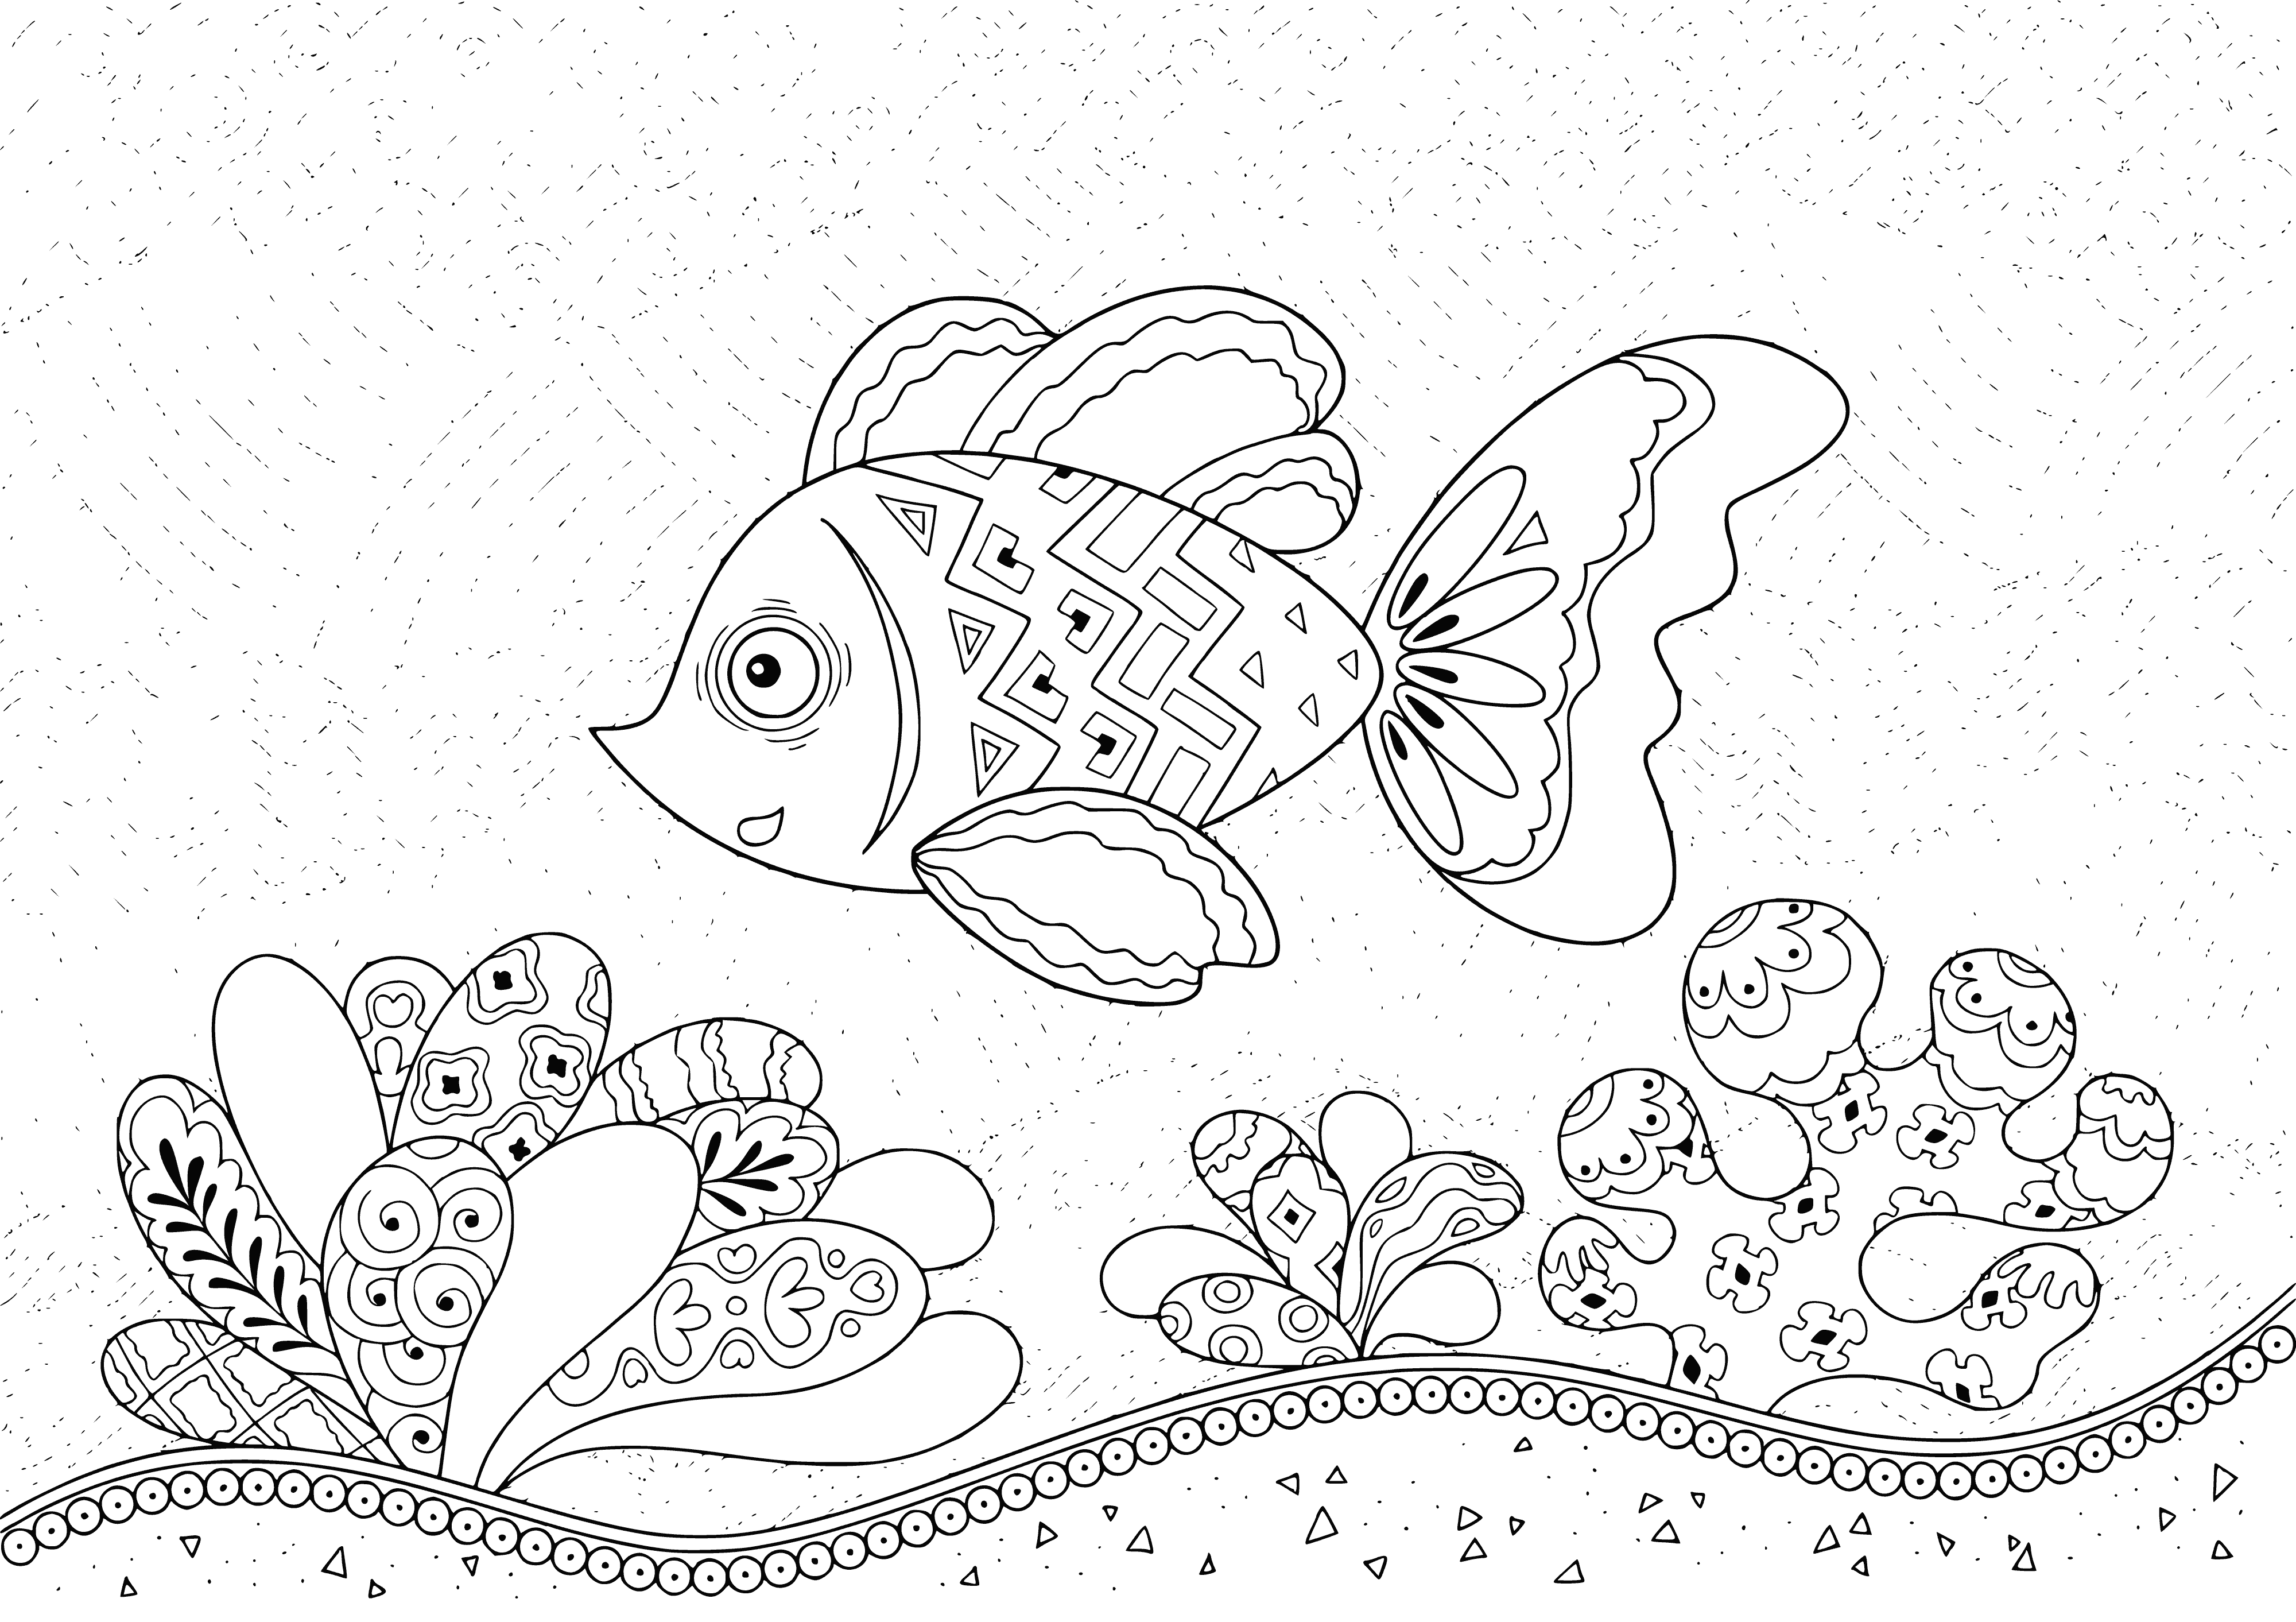 Fish in the sea coloring page